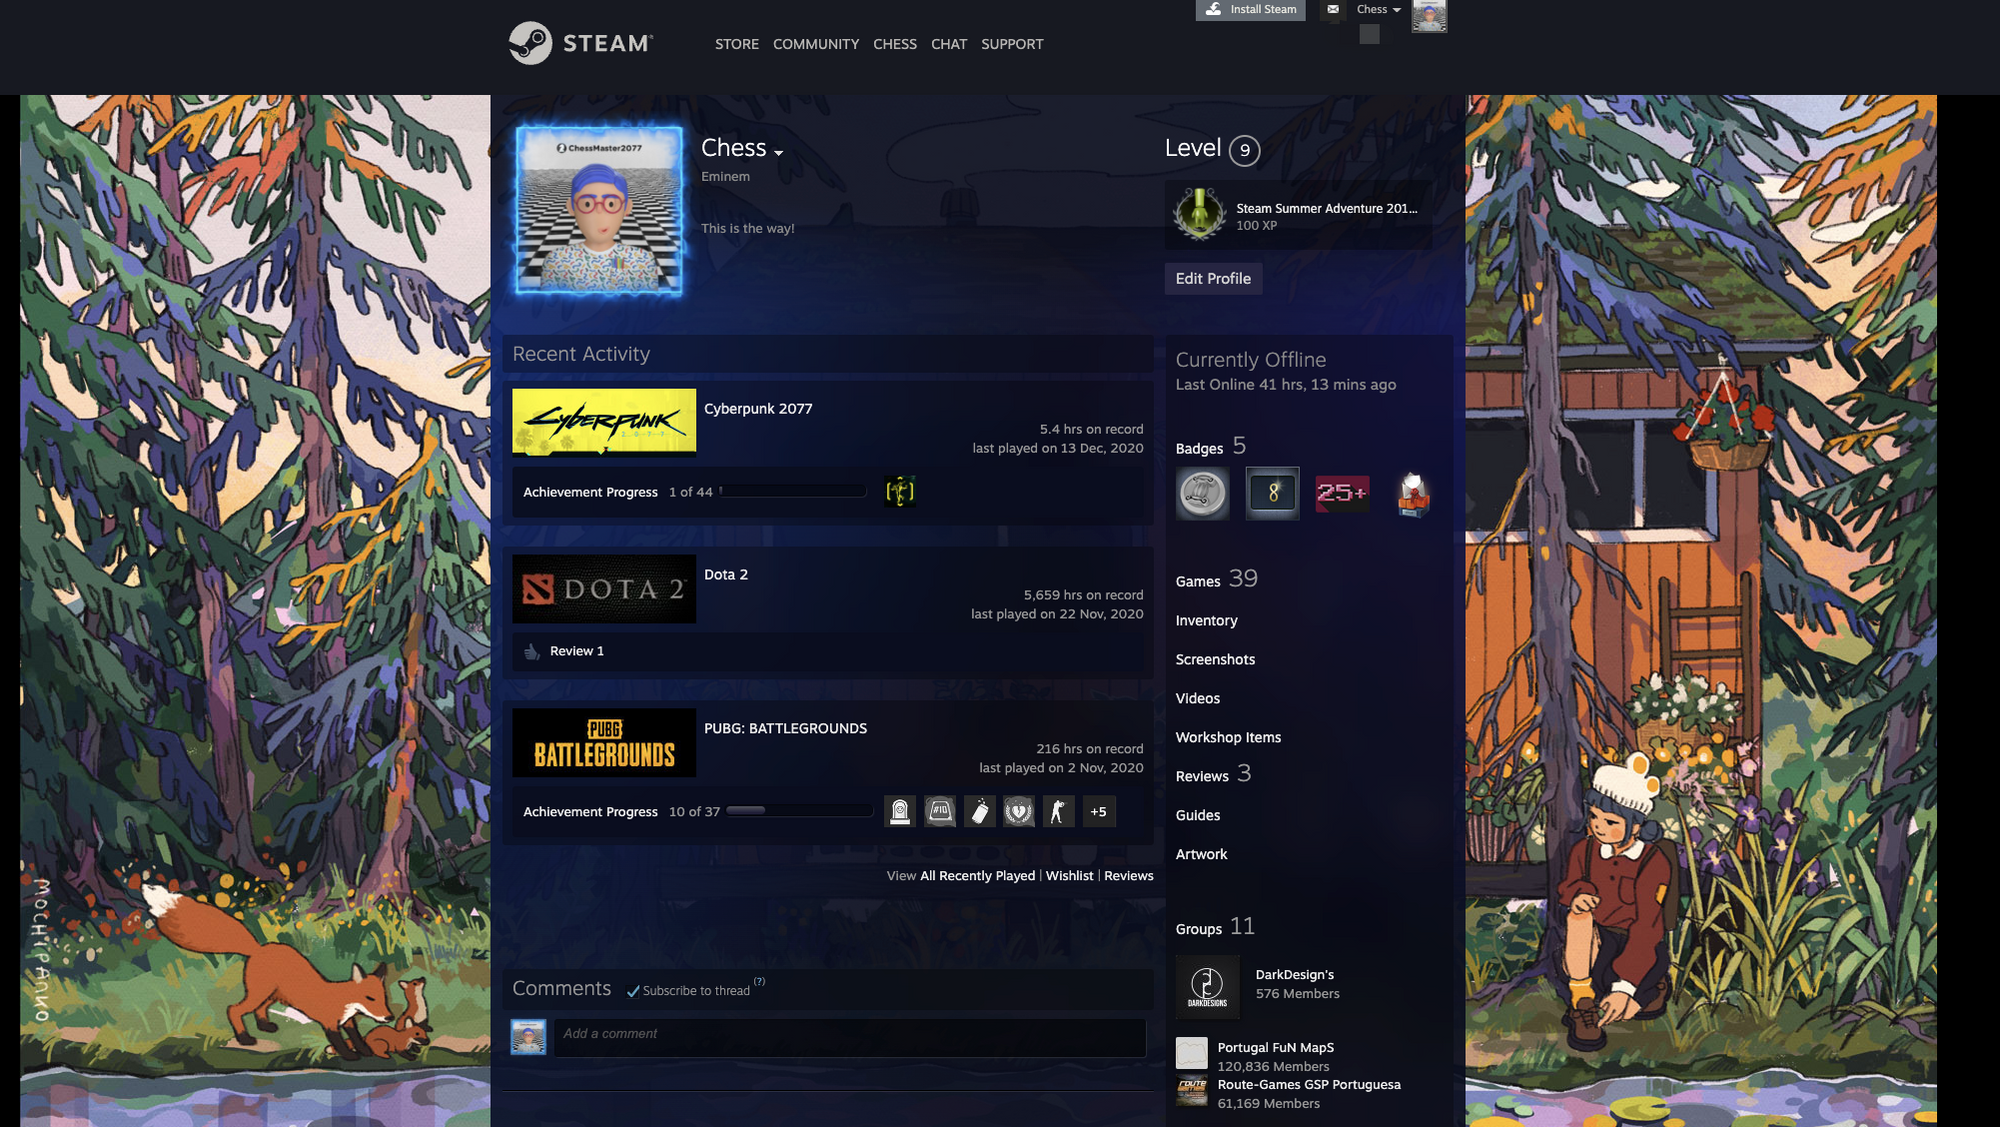 Homepage of Steam